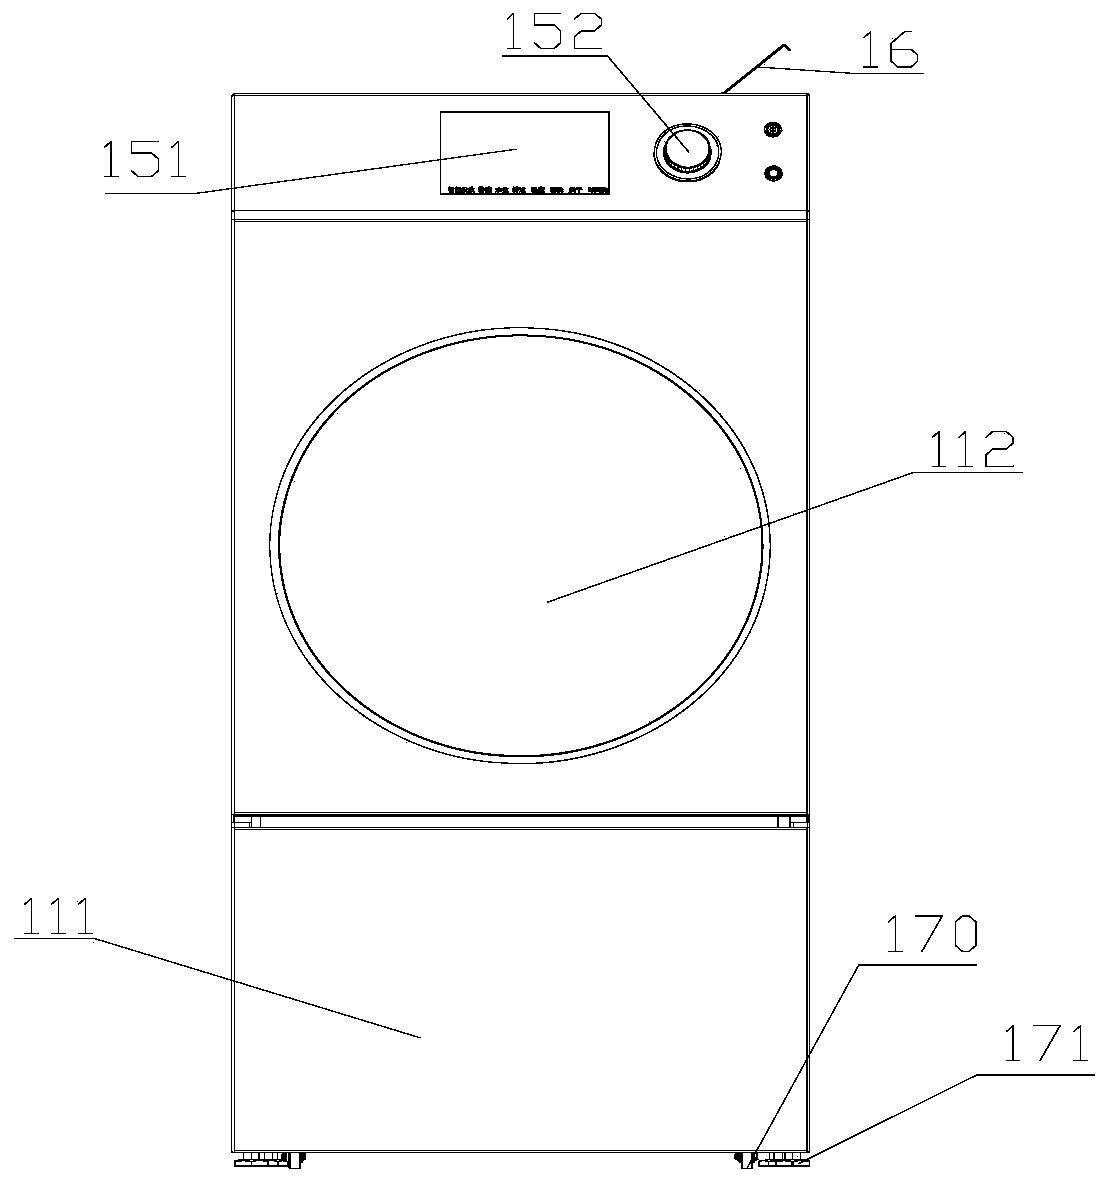 Integrated dry- and wet-cleaning washer housing convenient to maintain